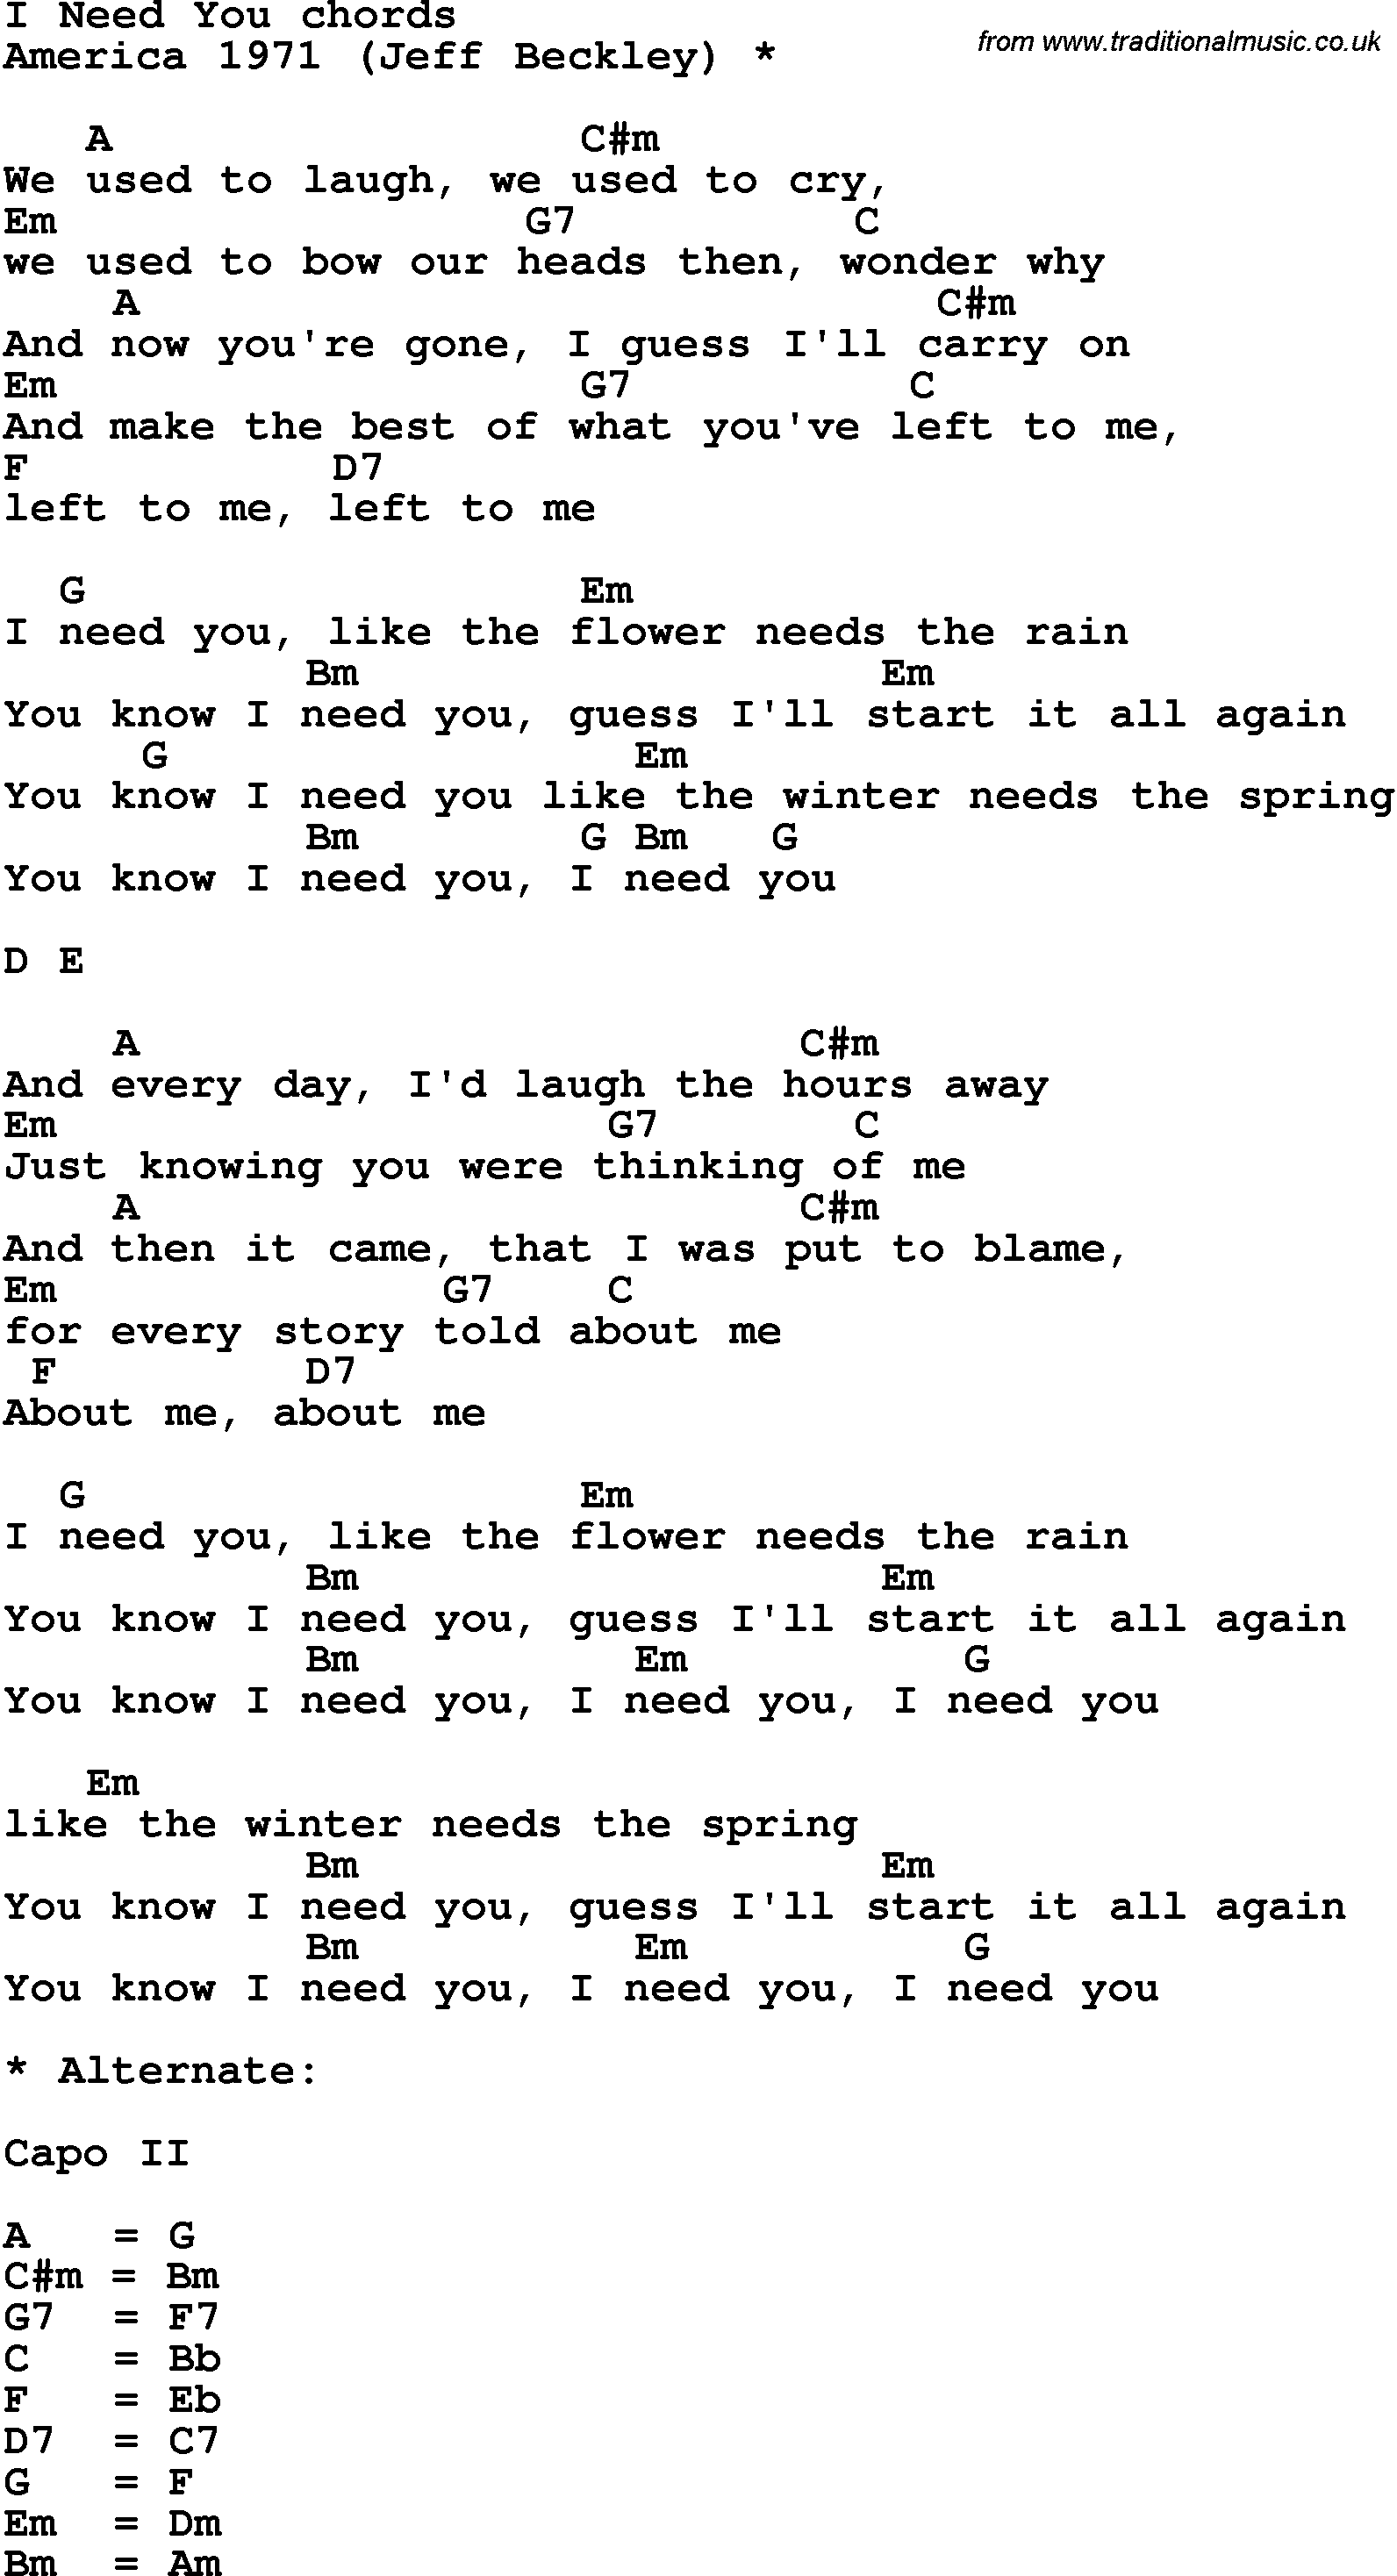 Song Lyrics with guitar chords for I Need You - America 1971